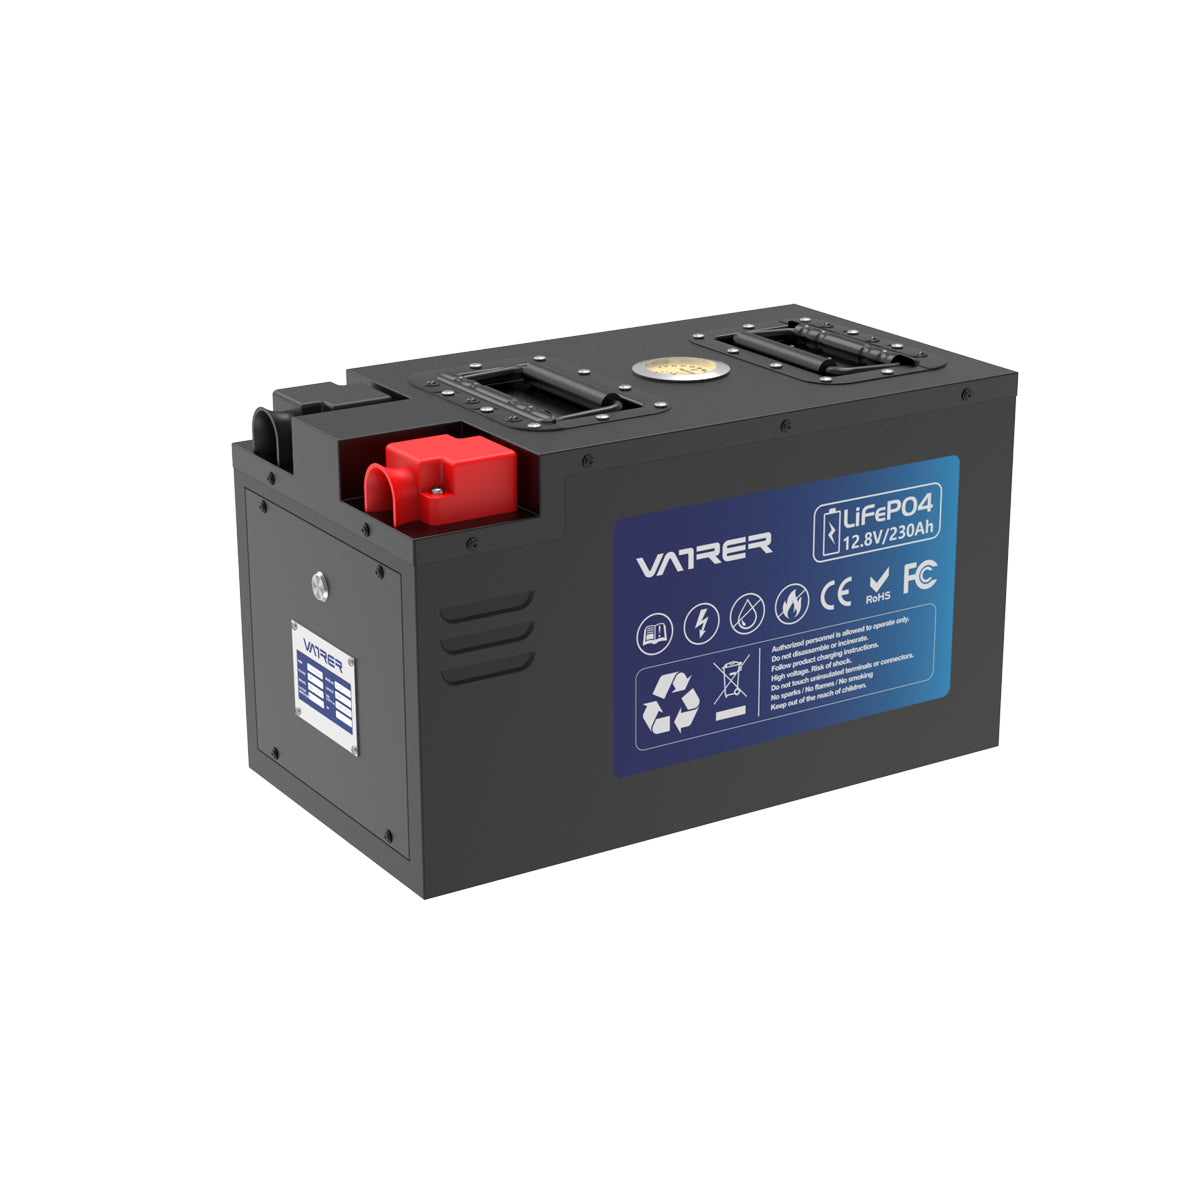 VATRER POWER 51.2V 100AH Lithium LiFePO4 Battery, Built-in 100A BMS, with  Touchable Smart Display & Mobile APP, Max. 5120W Power Output, 5000+  Cycles